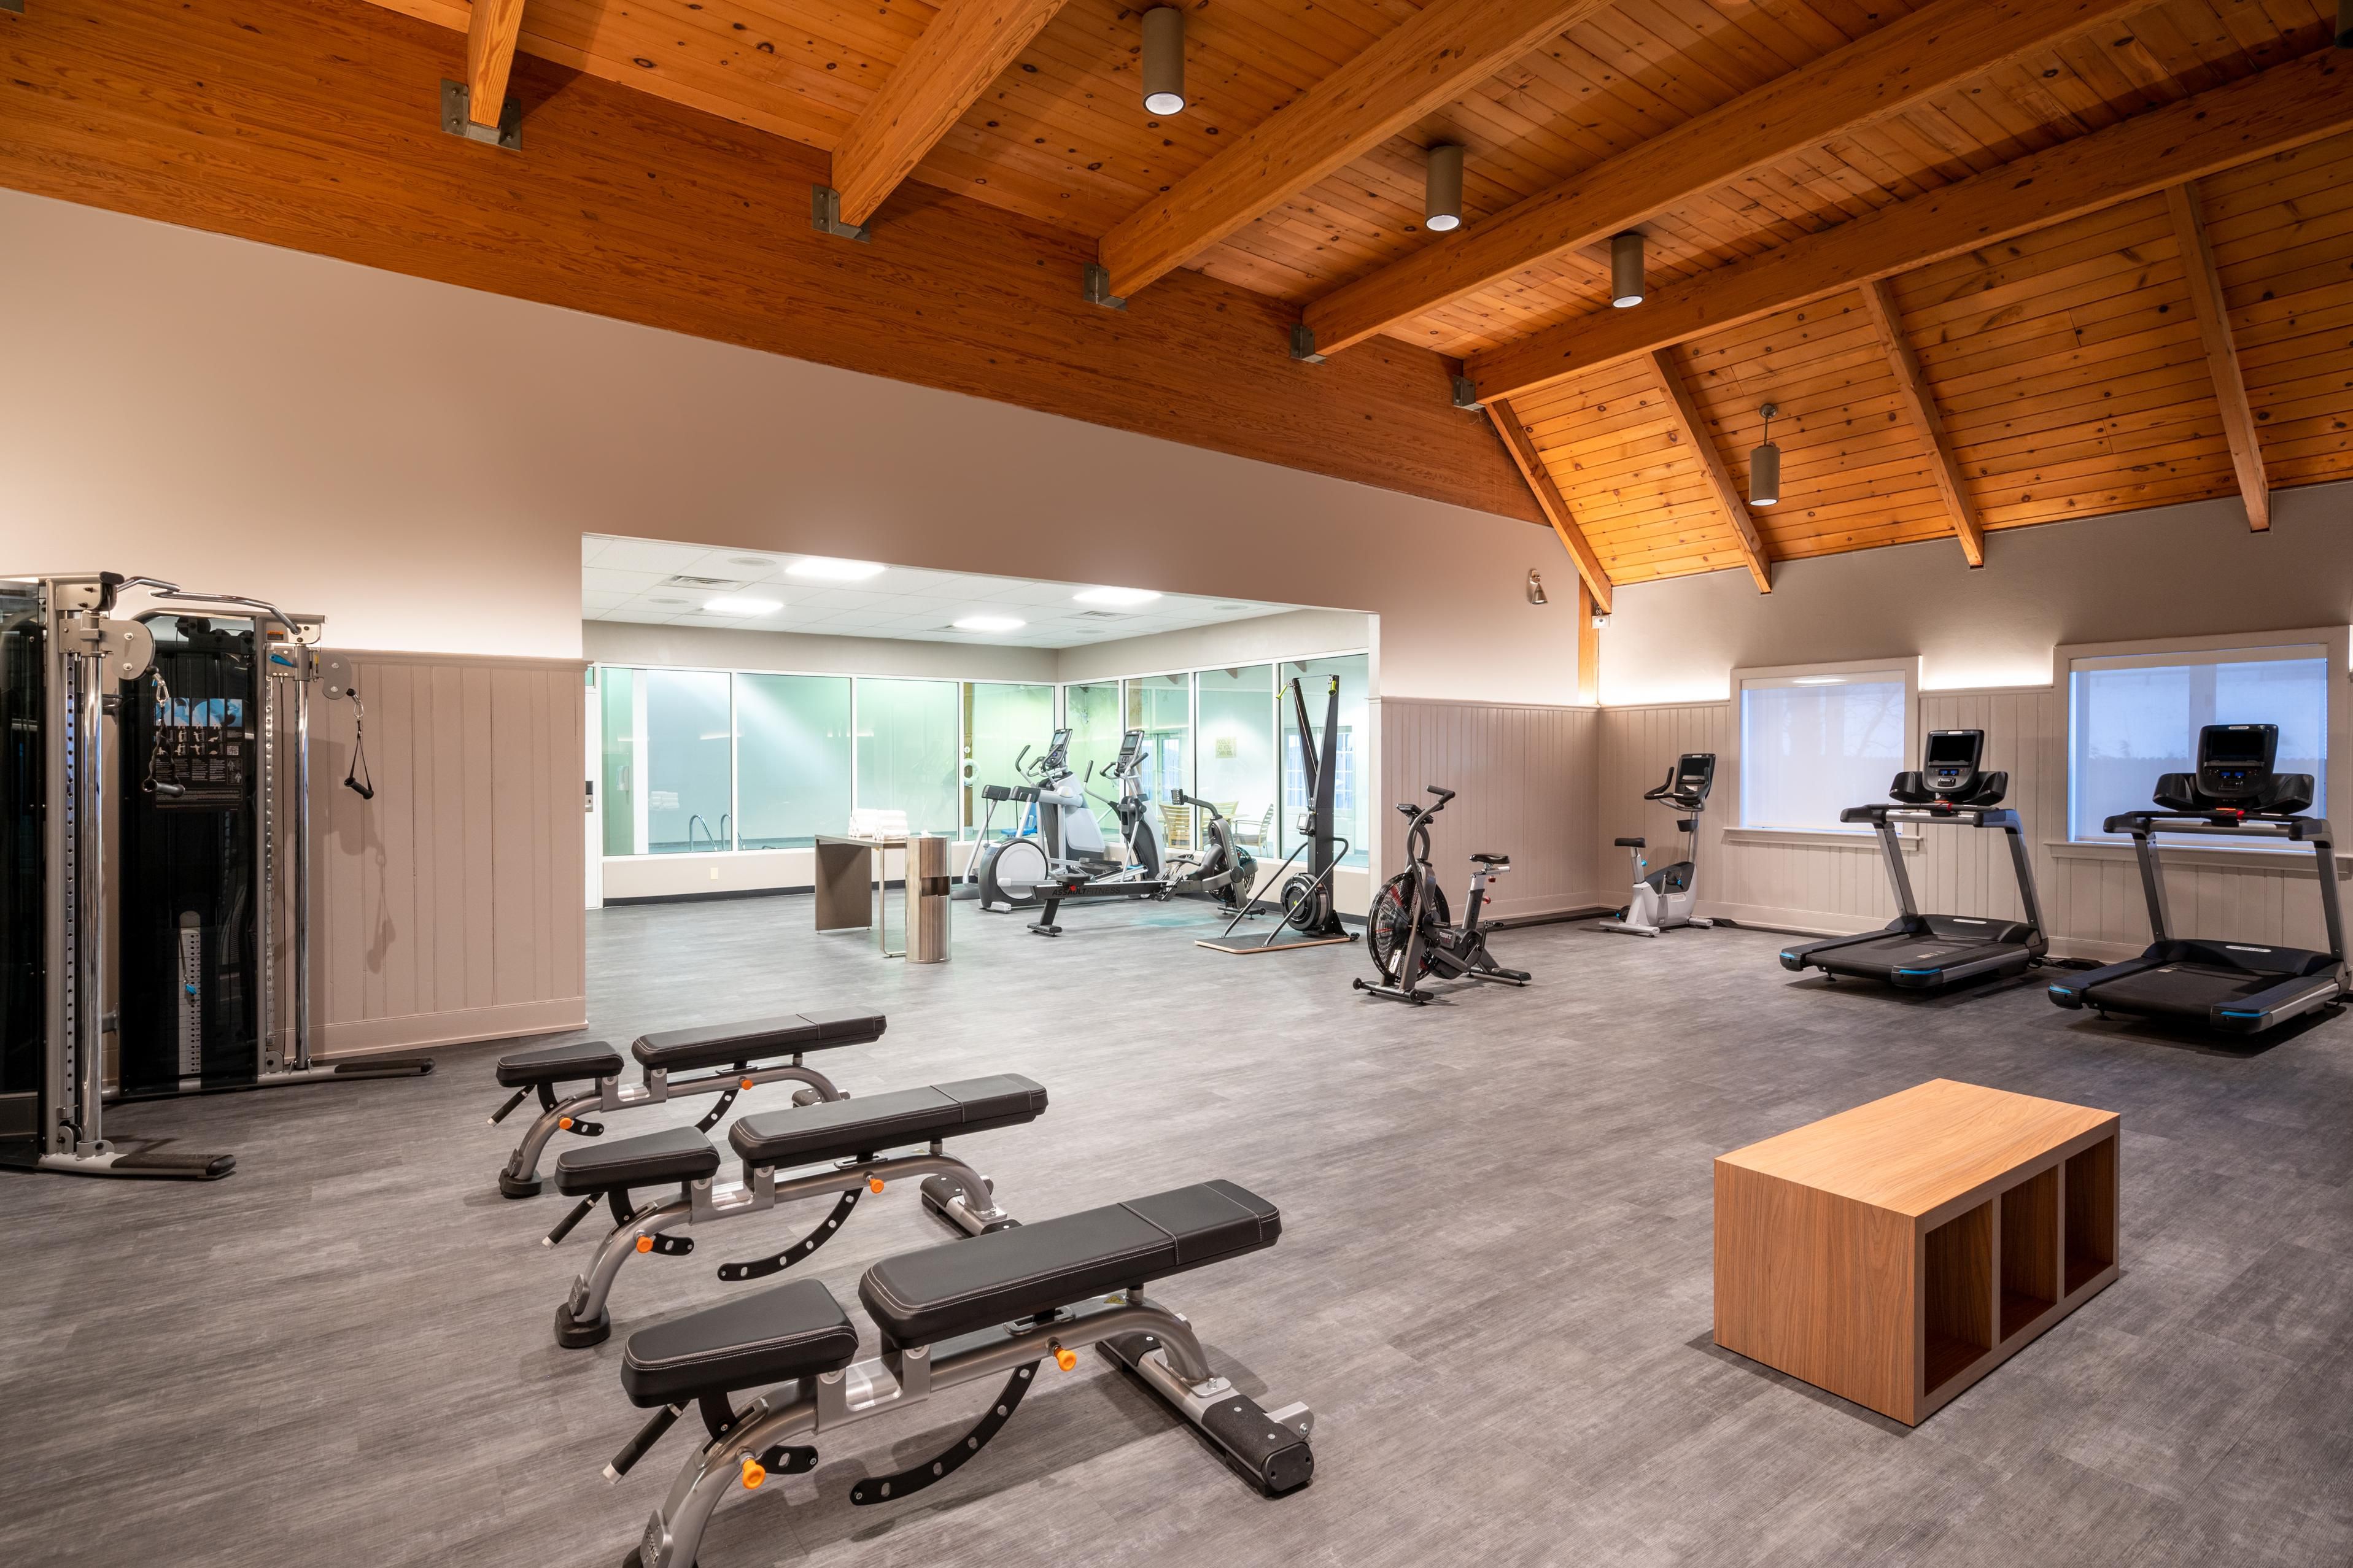 New 24-hour fitness center with extensive equipment